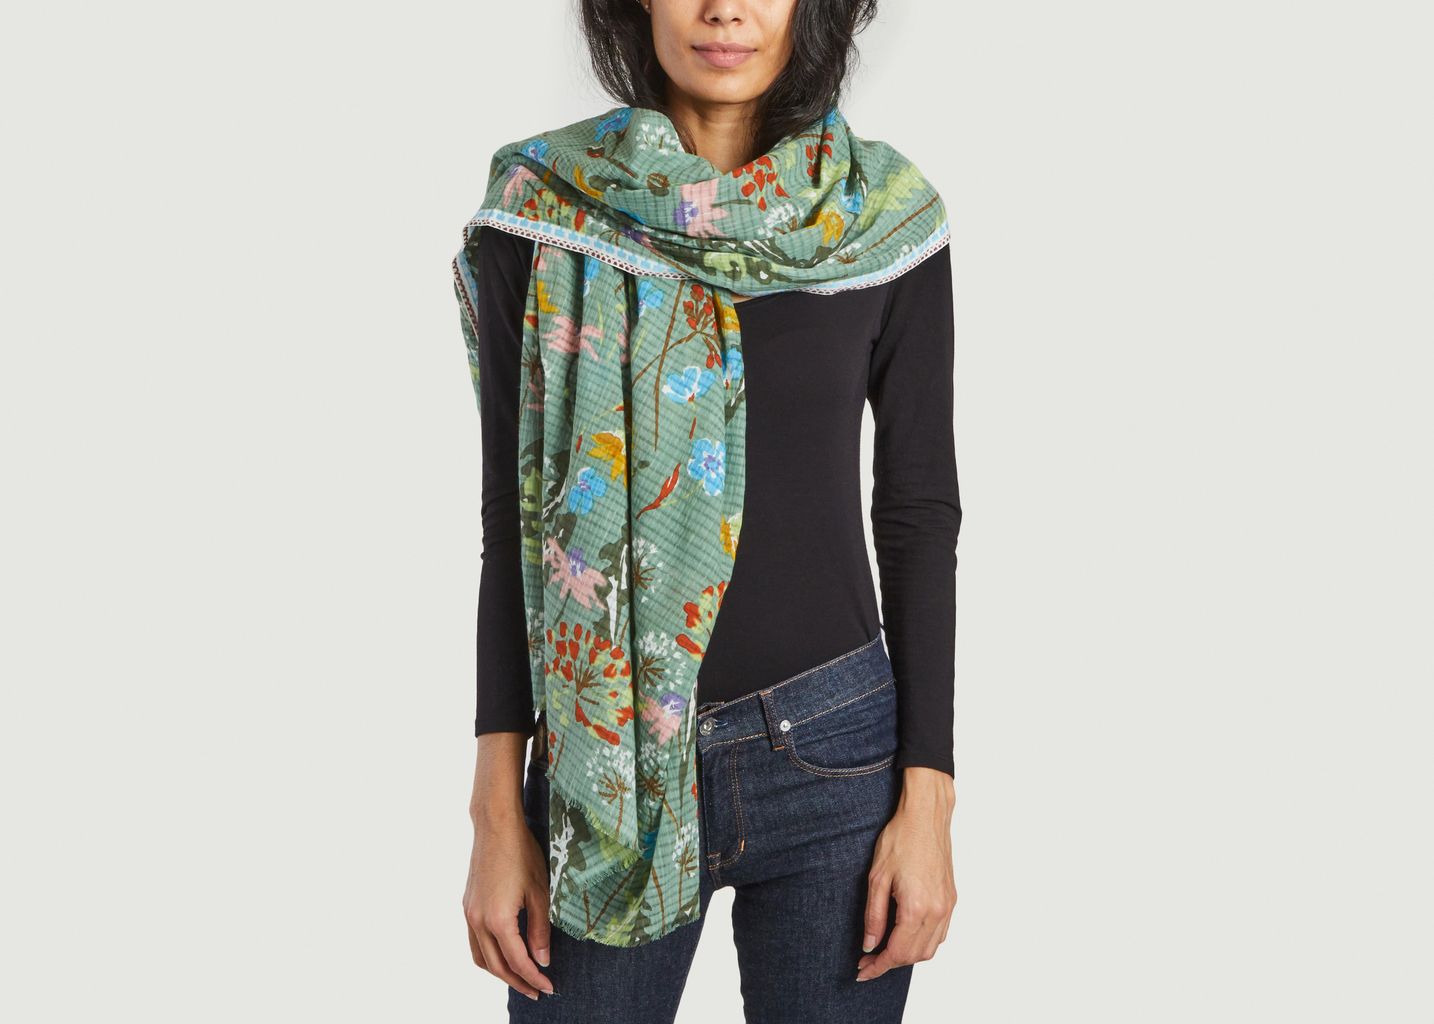 Flowered stole PS 2291 - Epice